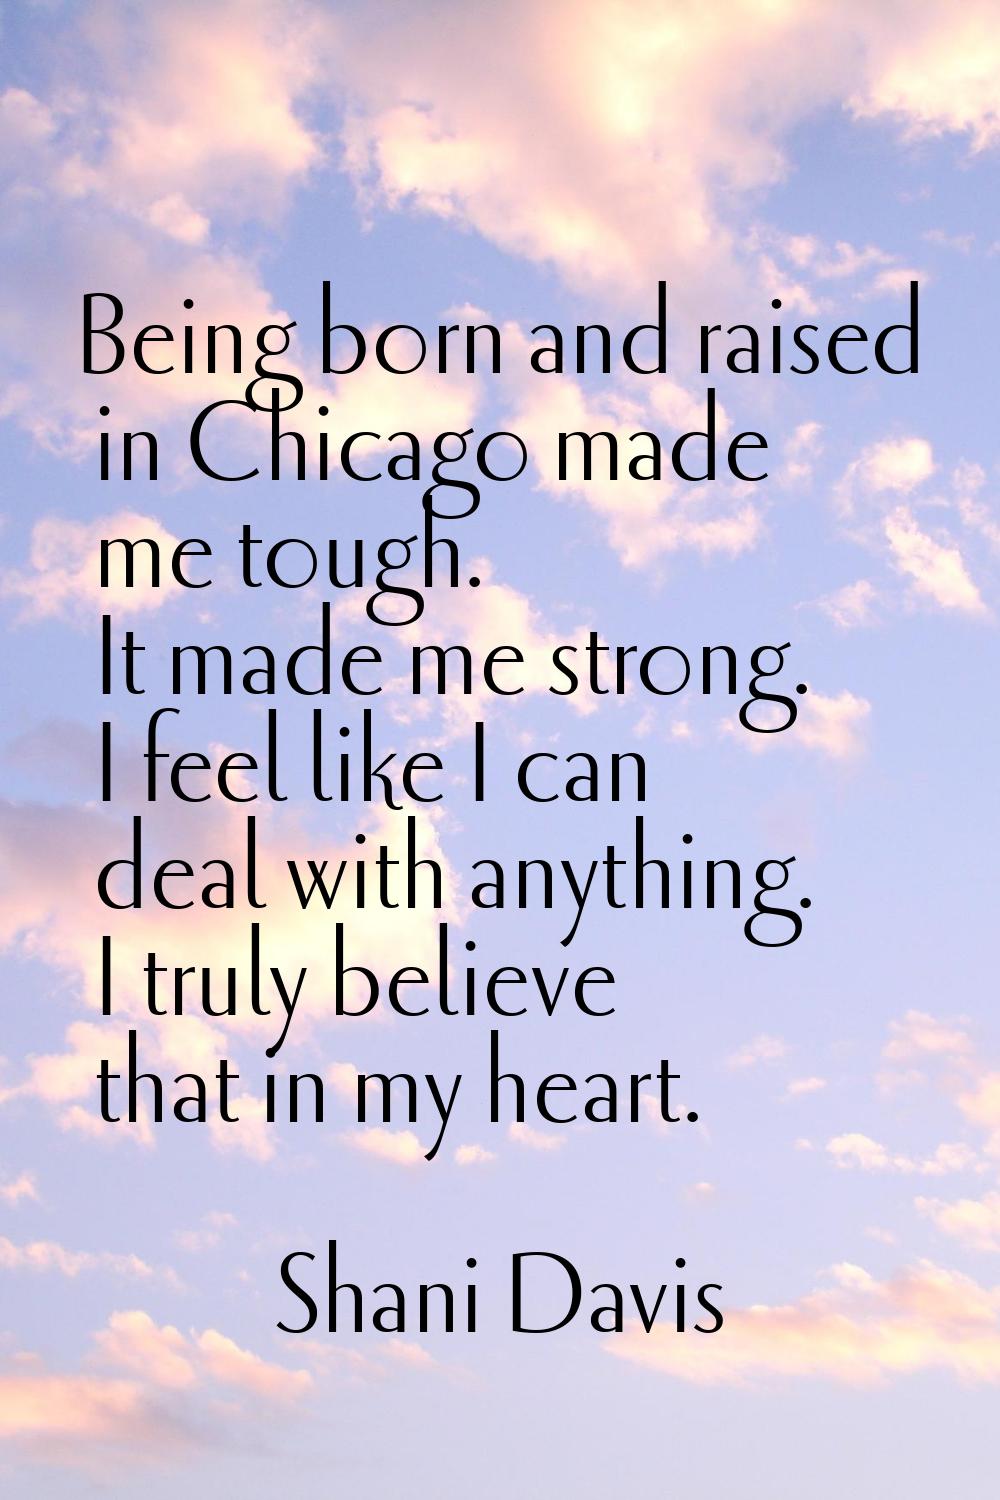 Being born and raised in Chicago made me tough. It made me strong. I feel like I can deal with anyt